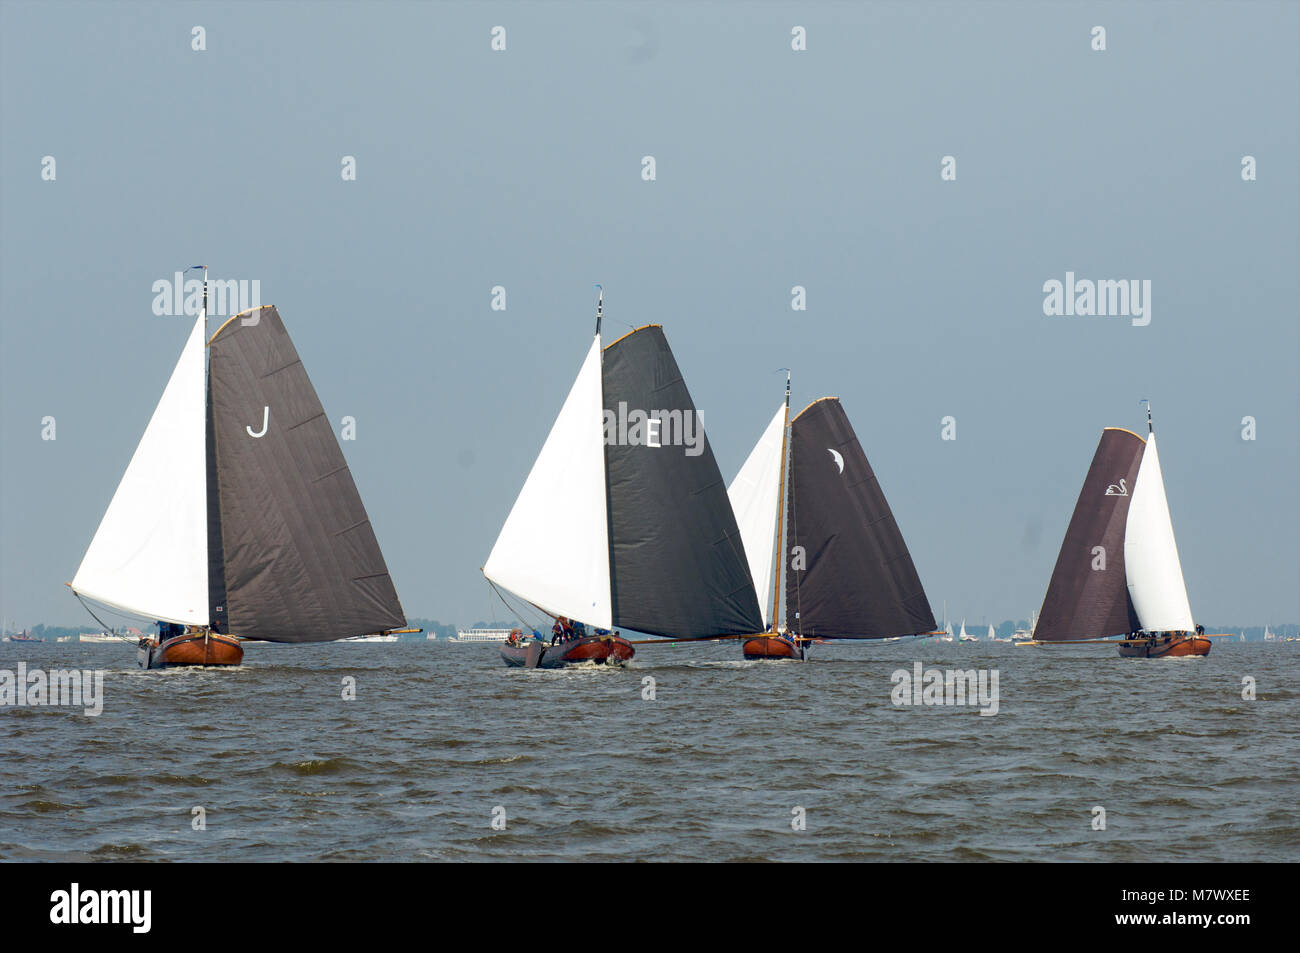 A traditional sailing race with classic Dutch wooden flat-bottemend boats on the lakes in Frisia, The Netherlands Stock Photo